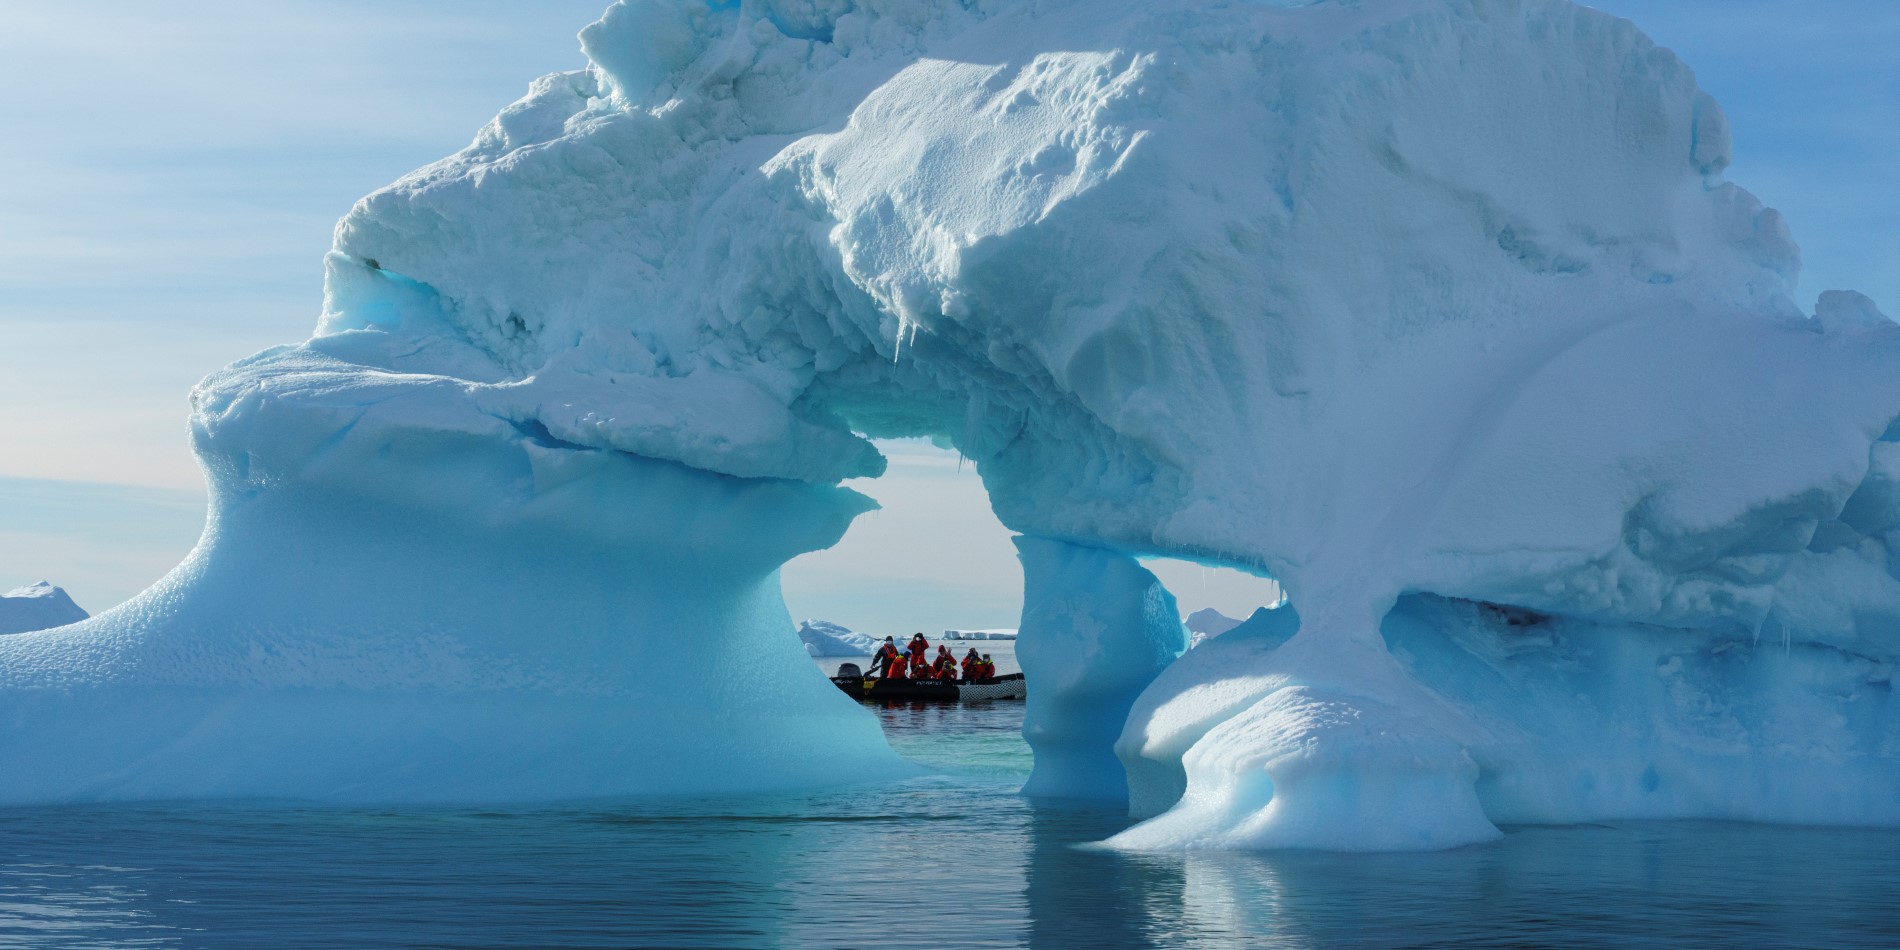 Expedition boat and icebergs in Antarctica